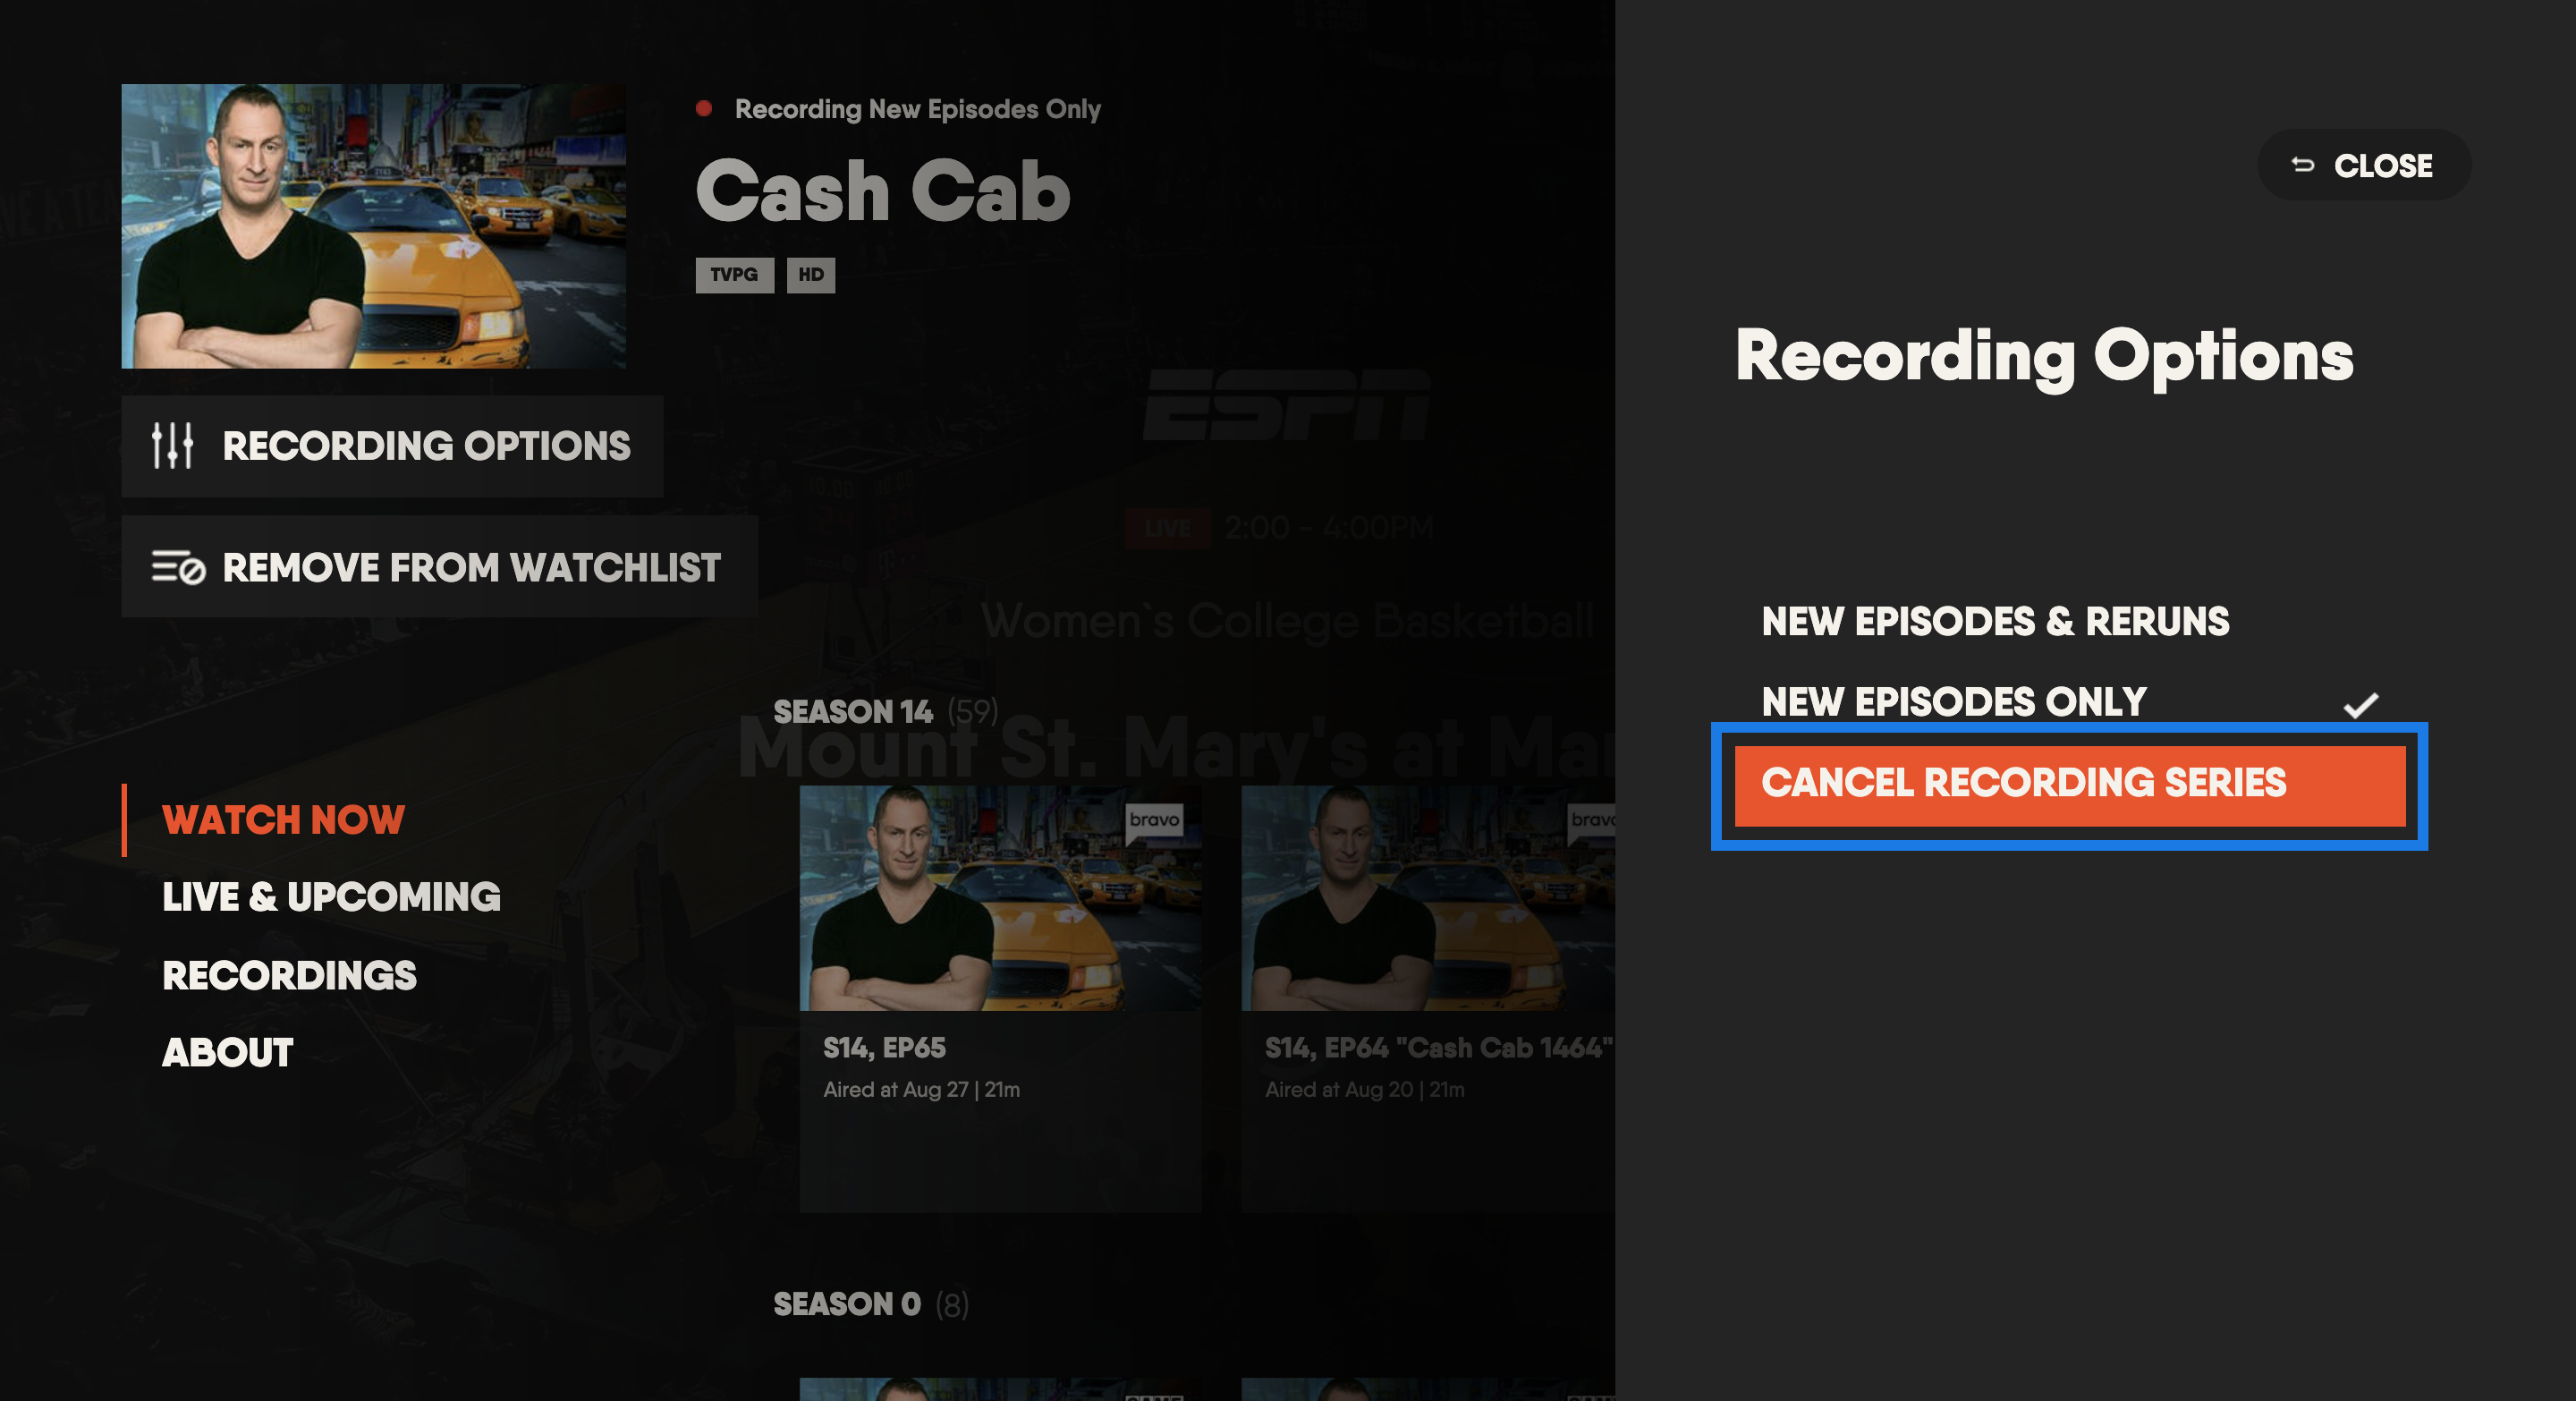 Series details page of the FuboTV app on Xbox with recording options shown on the right and CANCEL RECORDING SERIES highlighted